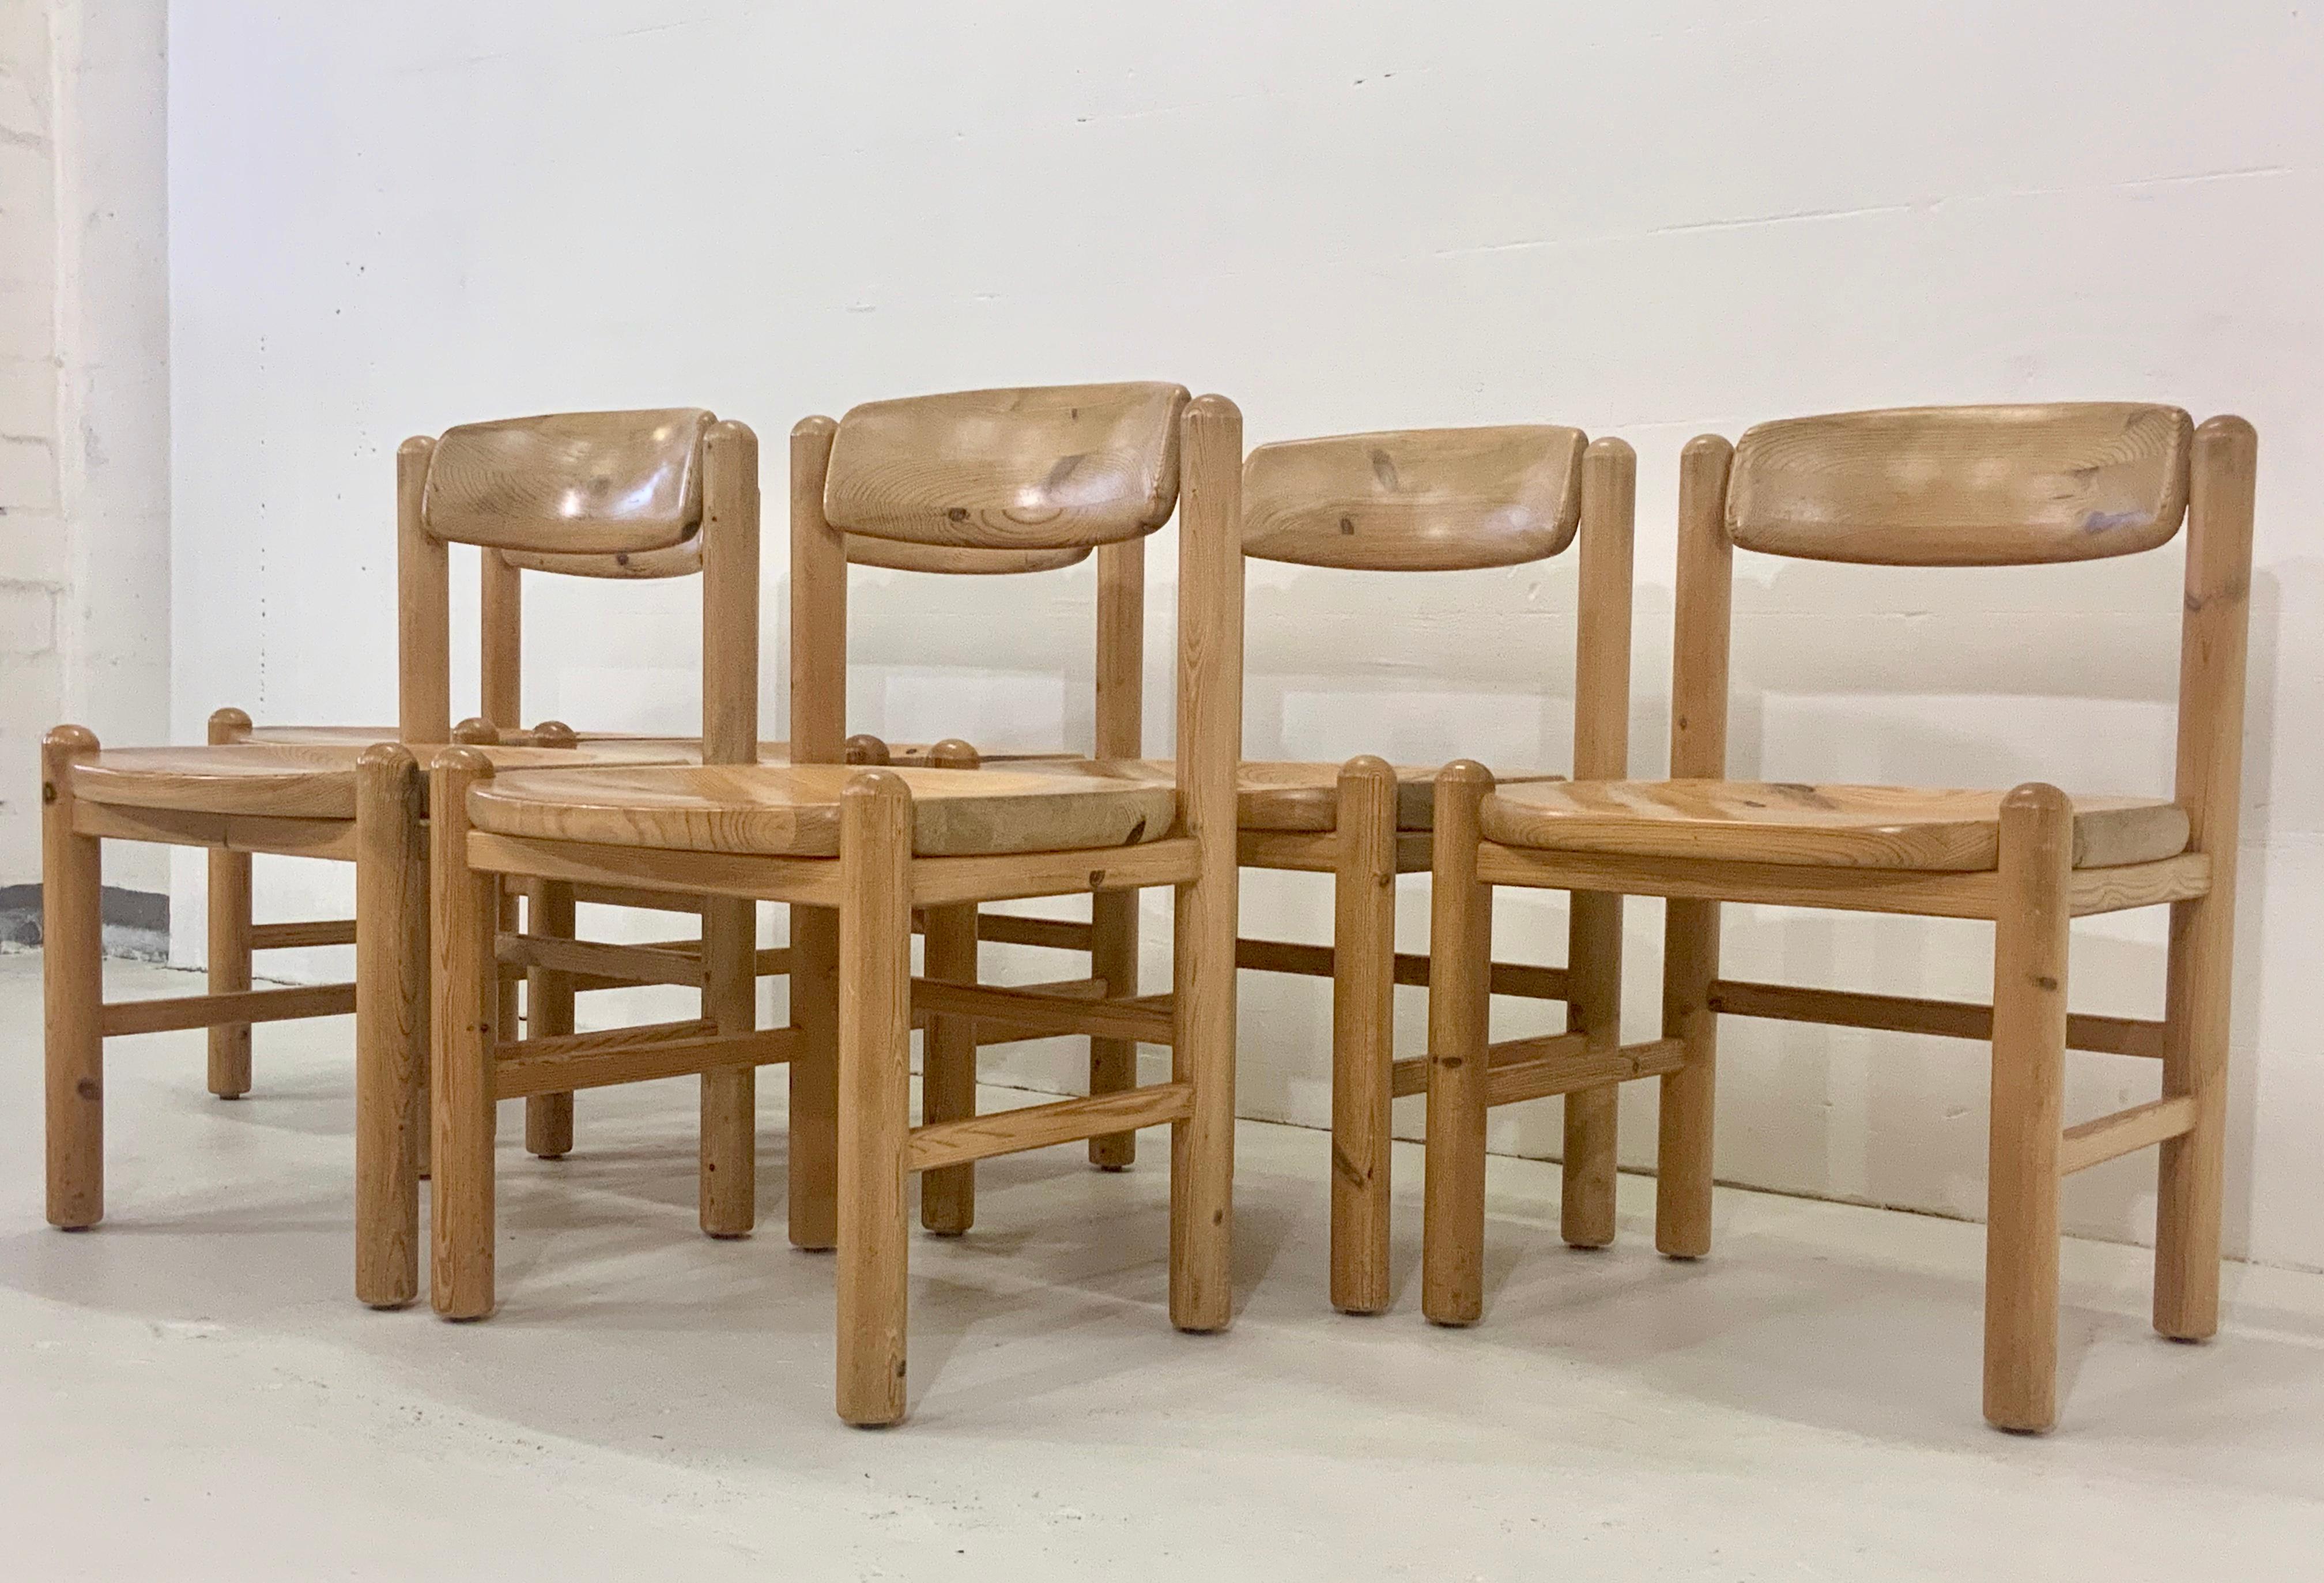 Exclusive Danish Scandinavian vintage high chairs in highest quality with beautiful patinated wood grain from the solid pine wood frame.
Design by Rainer Daumiller in the midcentury 1960s produced by Hirtshals Savvaerk in Denmark.
Also Hans J.